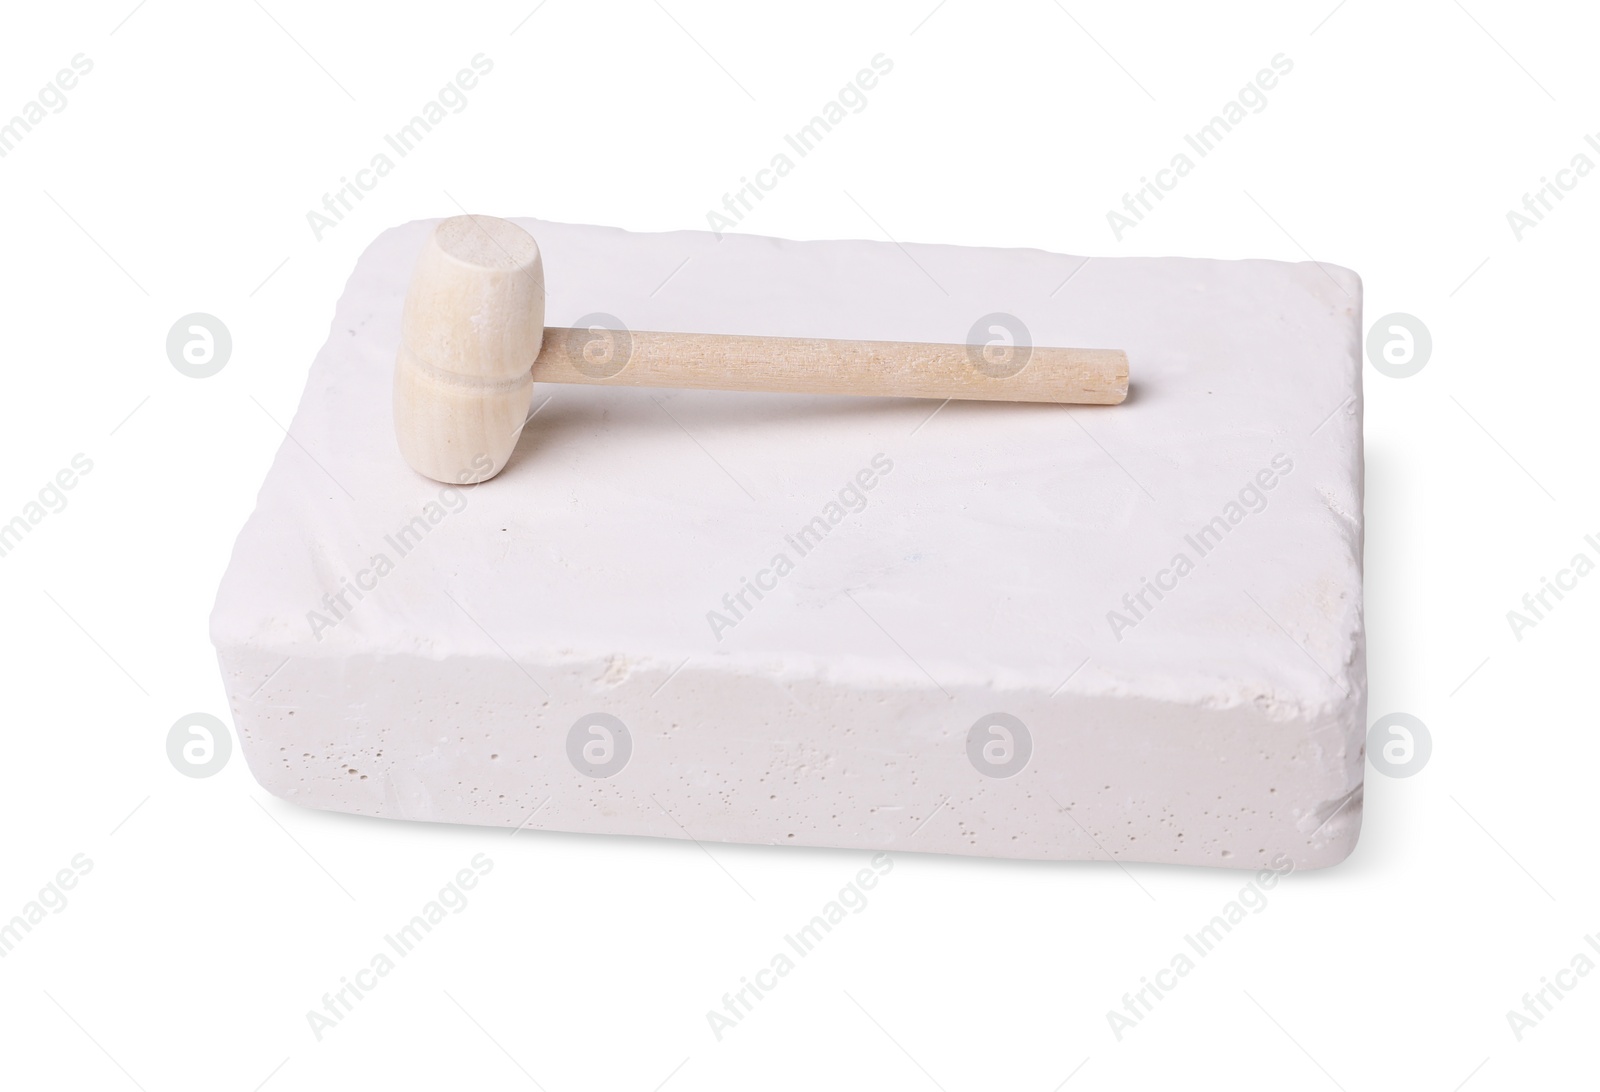 Photo of Educational toy for motor skills development. Excavation kit (plaster and wooden mallet) on white background